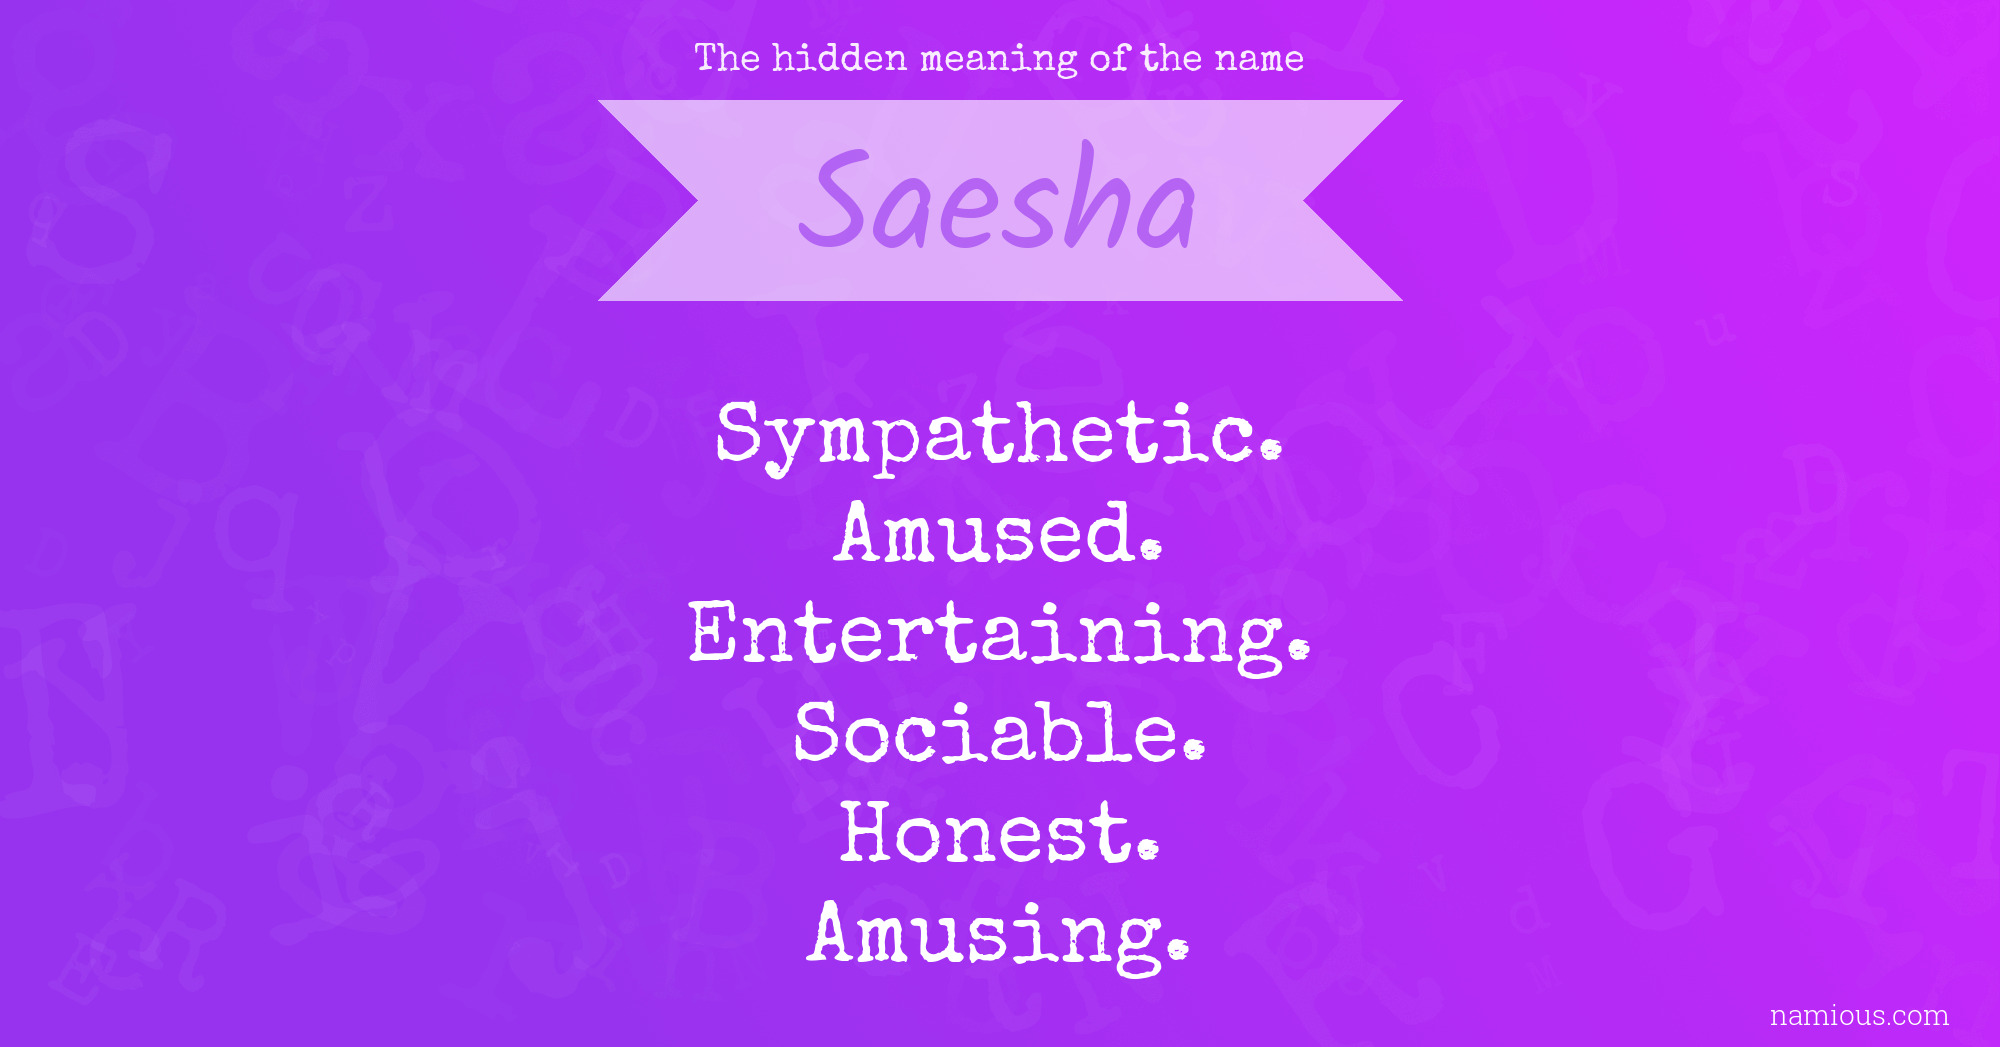 The hidden meaning of the name Saesha